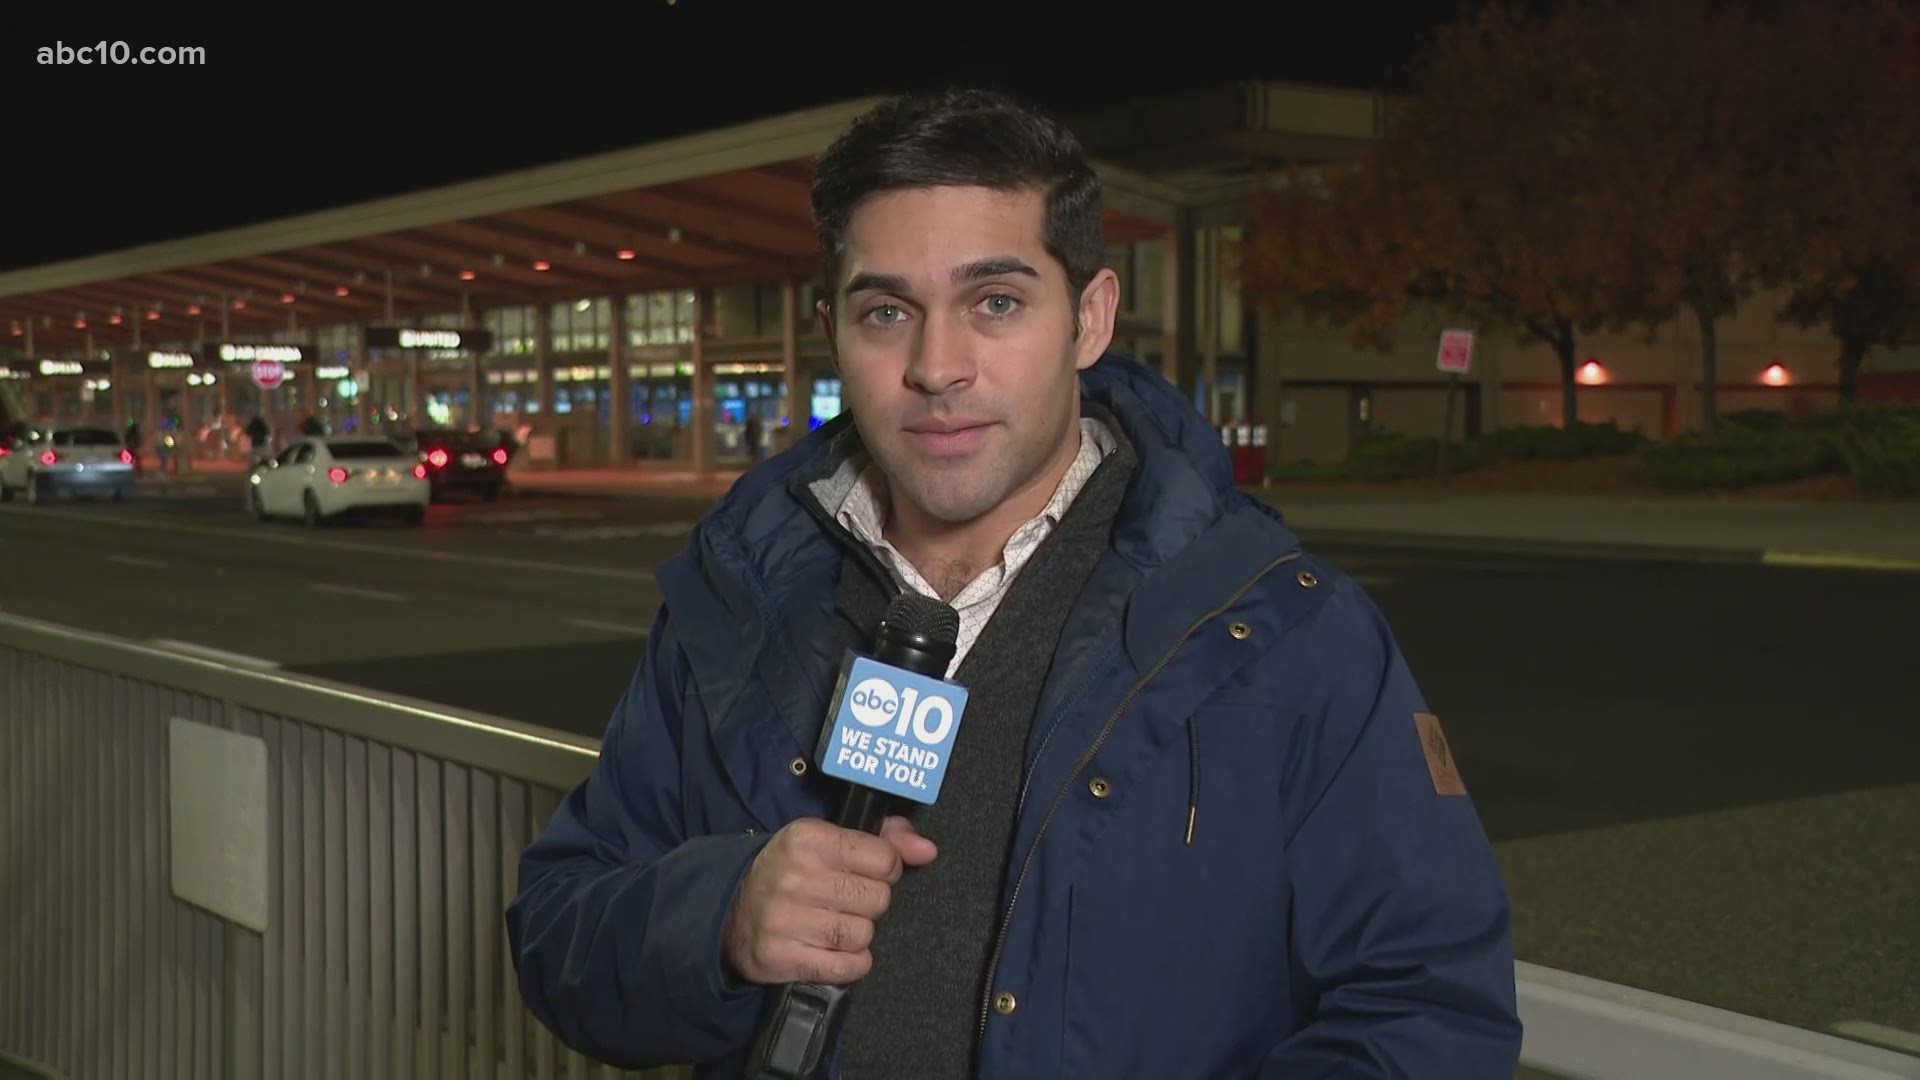 Zach Fuentes reports from SMF, where people have begun to travel for the holidays.